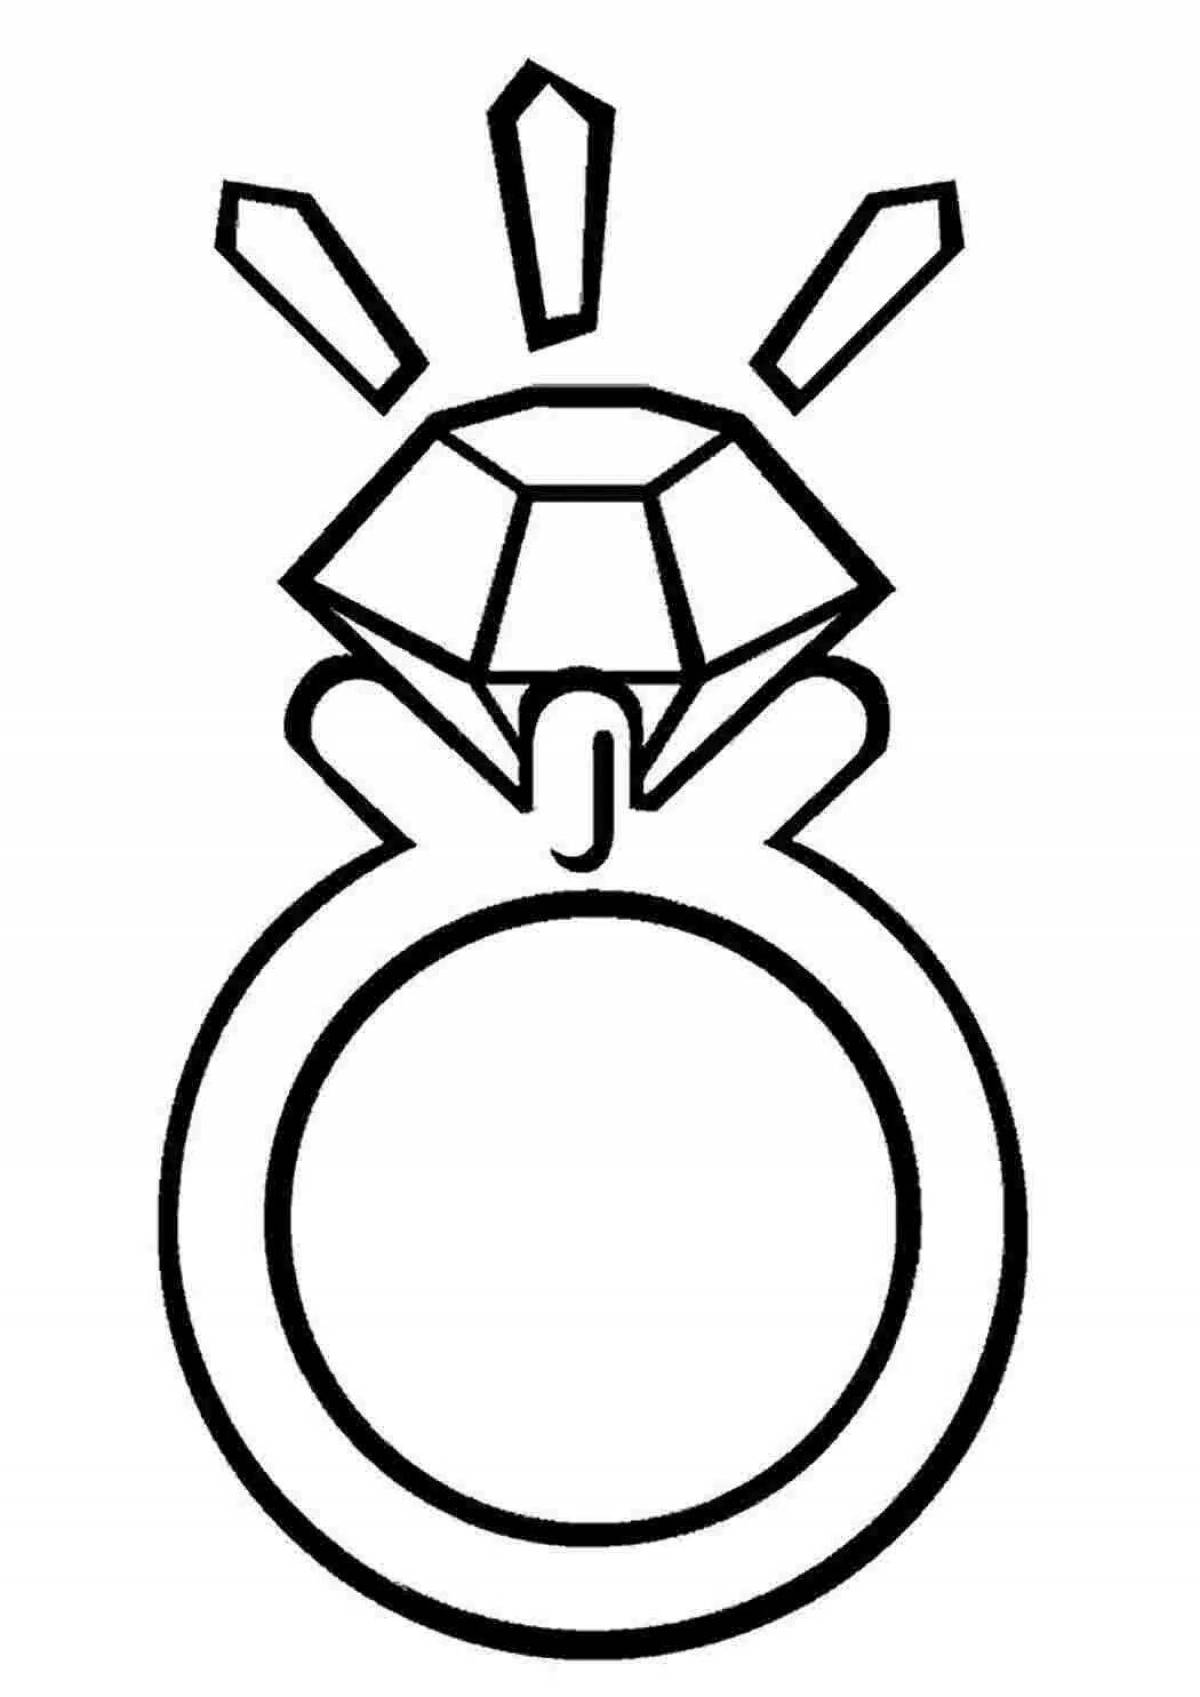 Coloring page charming rings for girls